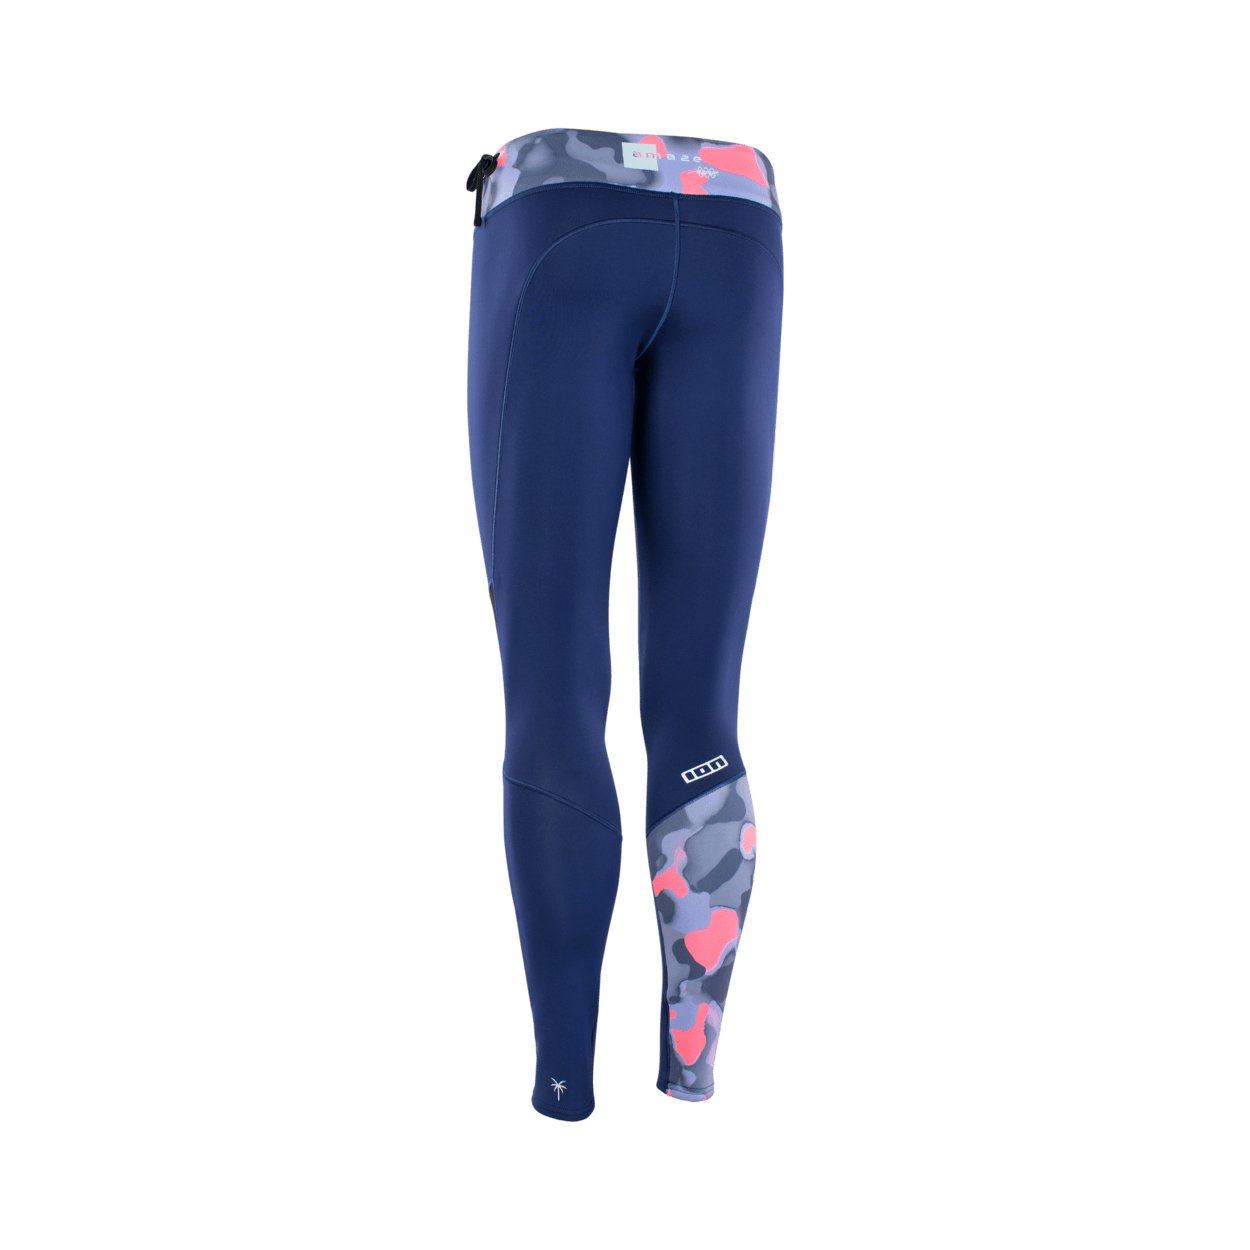 ION Women's Amaze Long Leggings Pants 1.5 2022 - Worthing Watersports - 9010583058511 - Wetsuits - ION Water